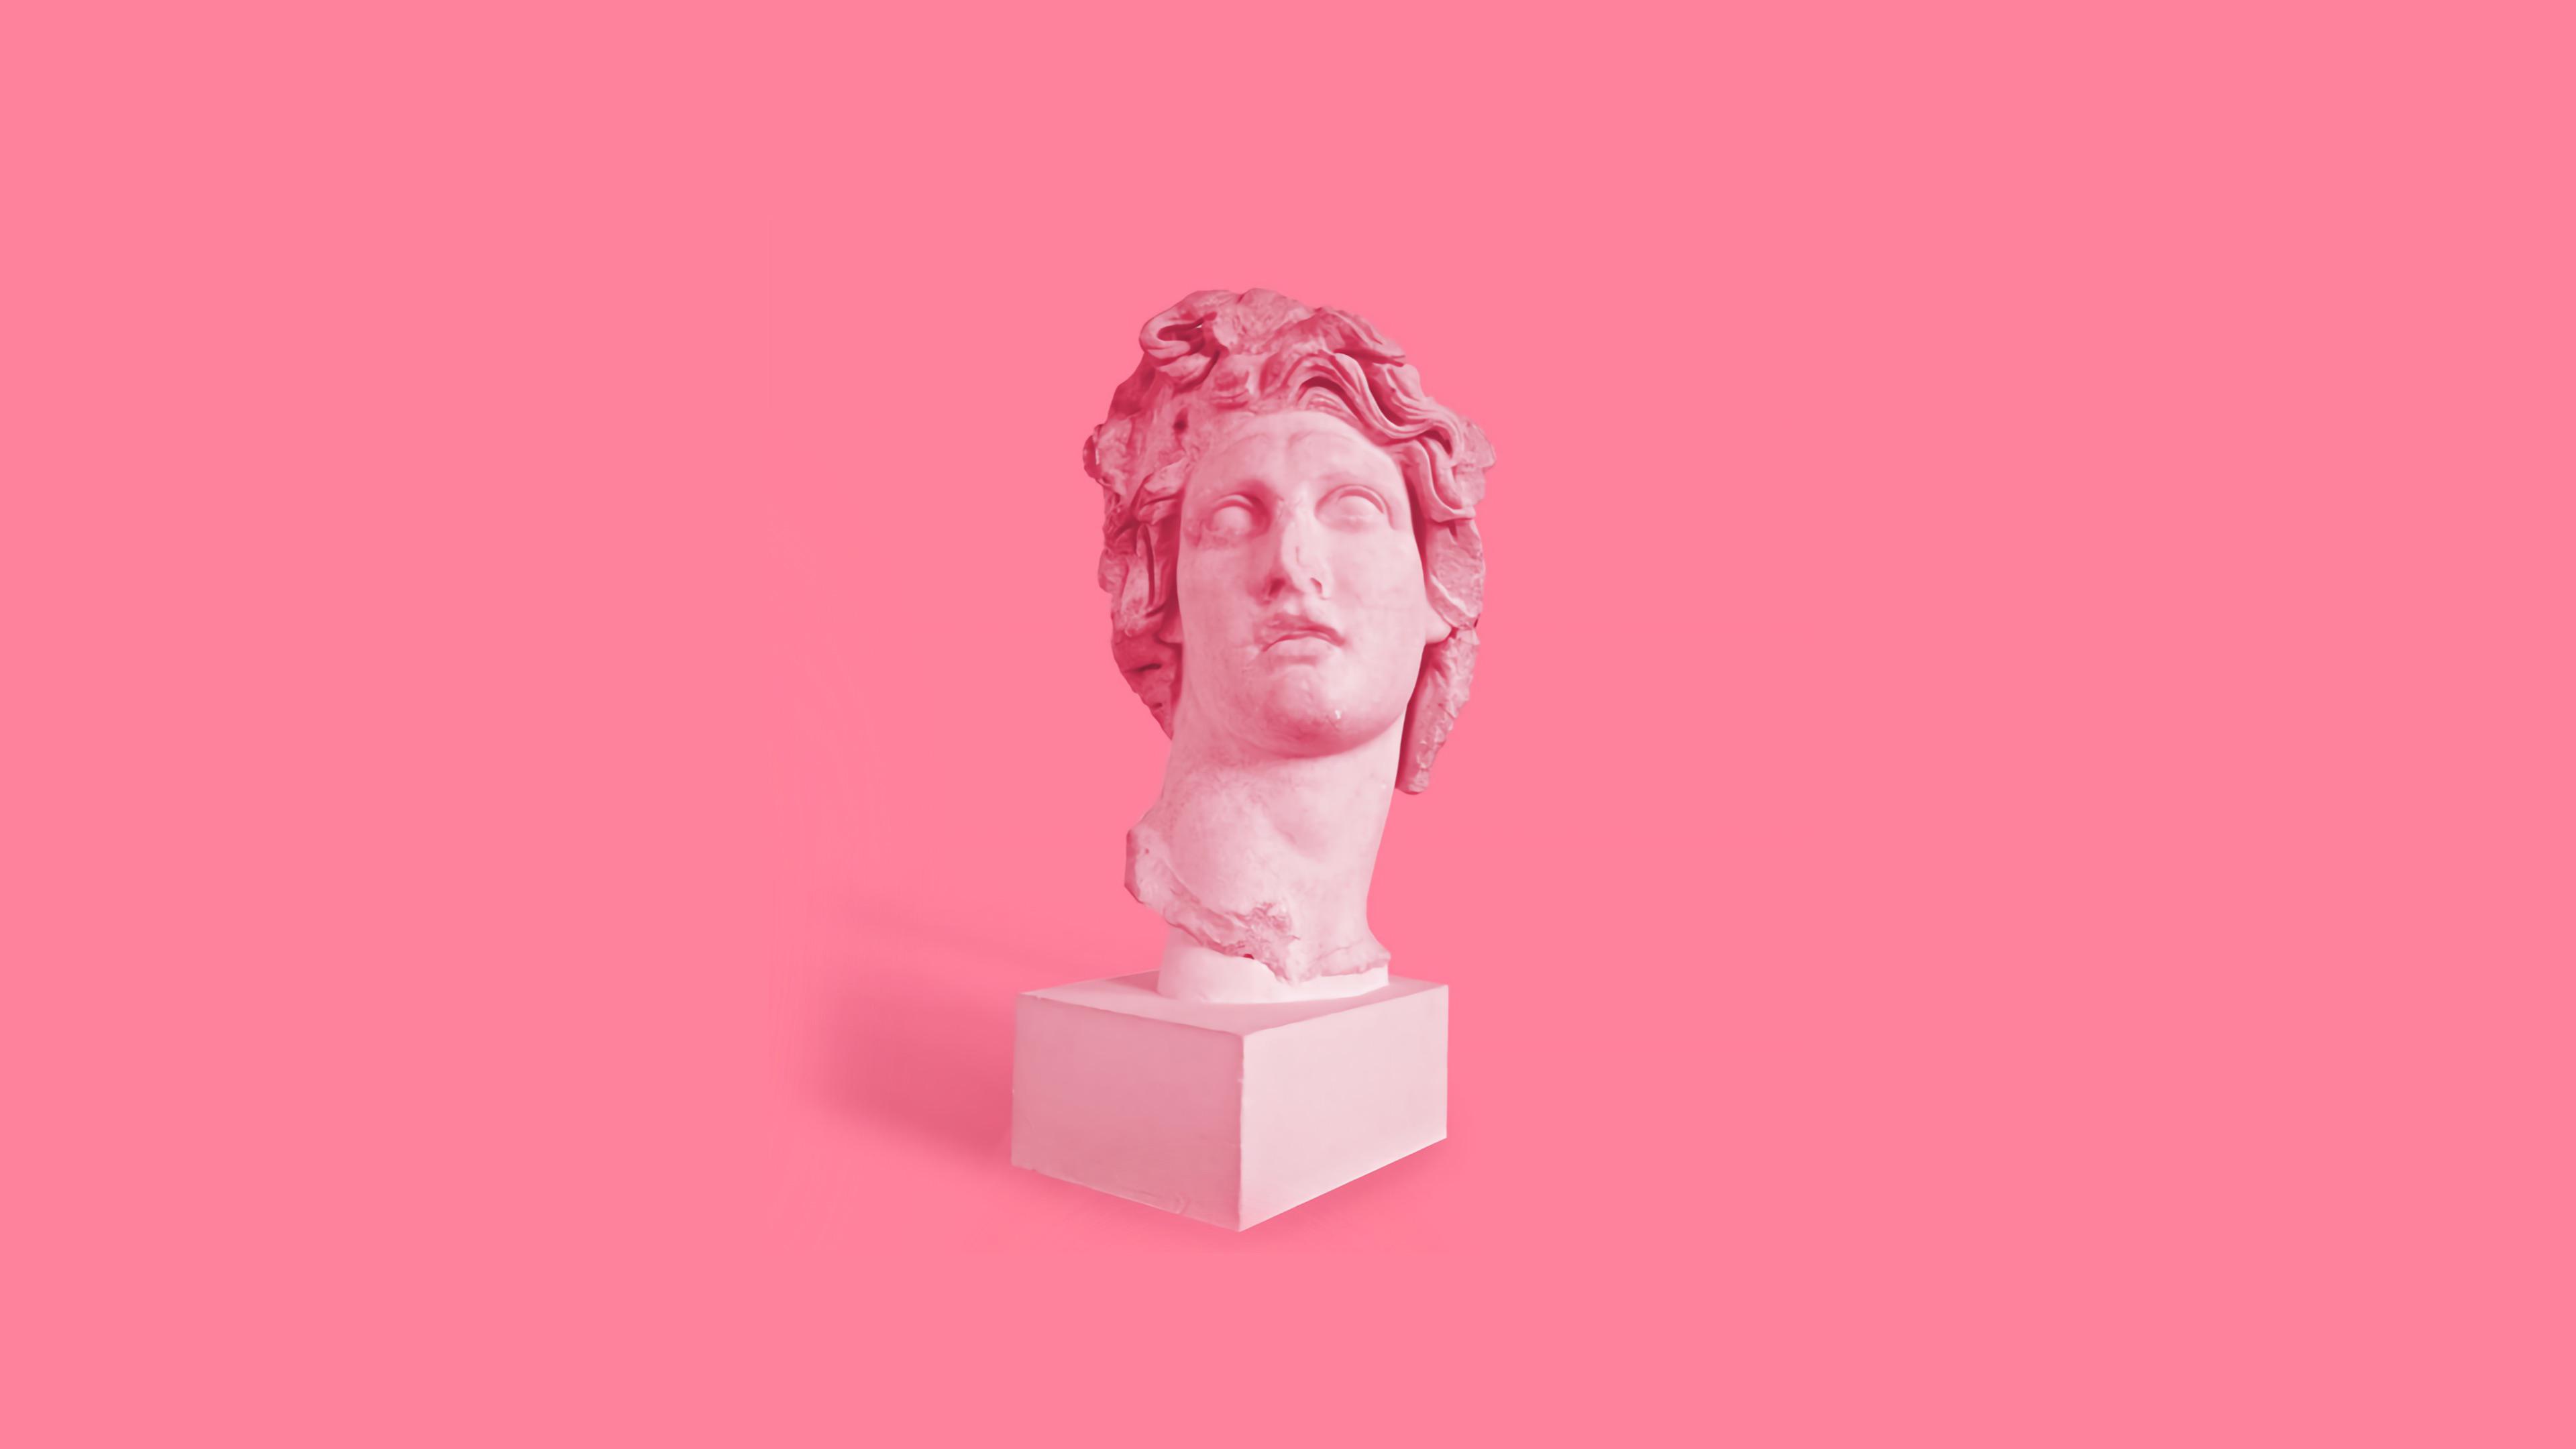 A pink and white sculpture of a man's head on a pink background - Statue